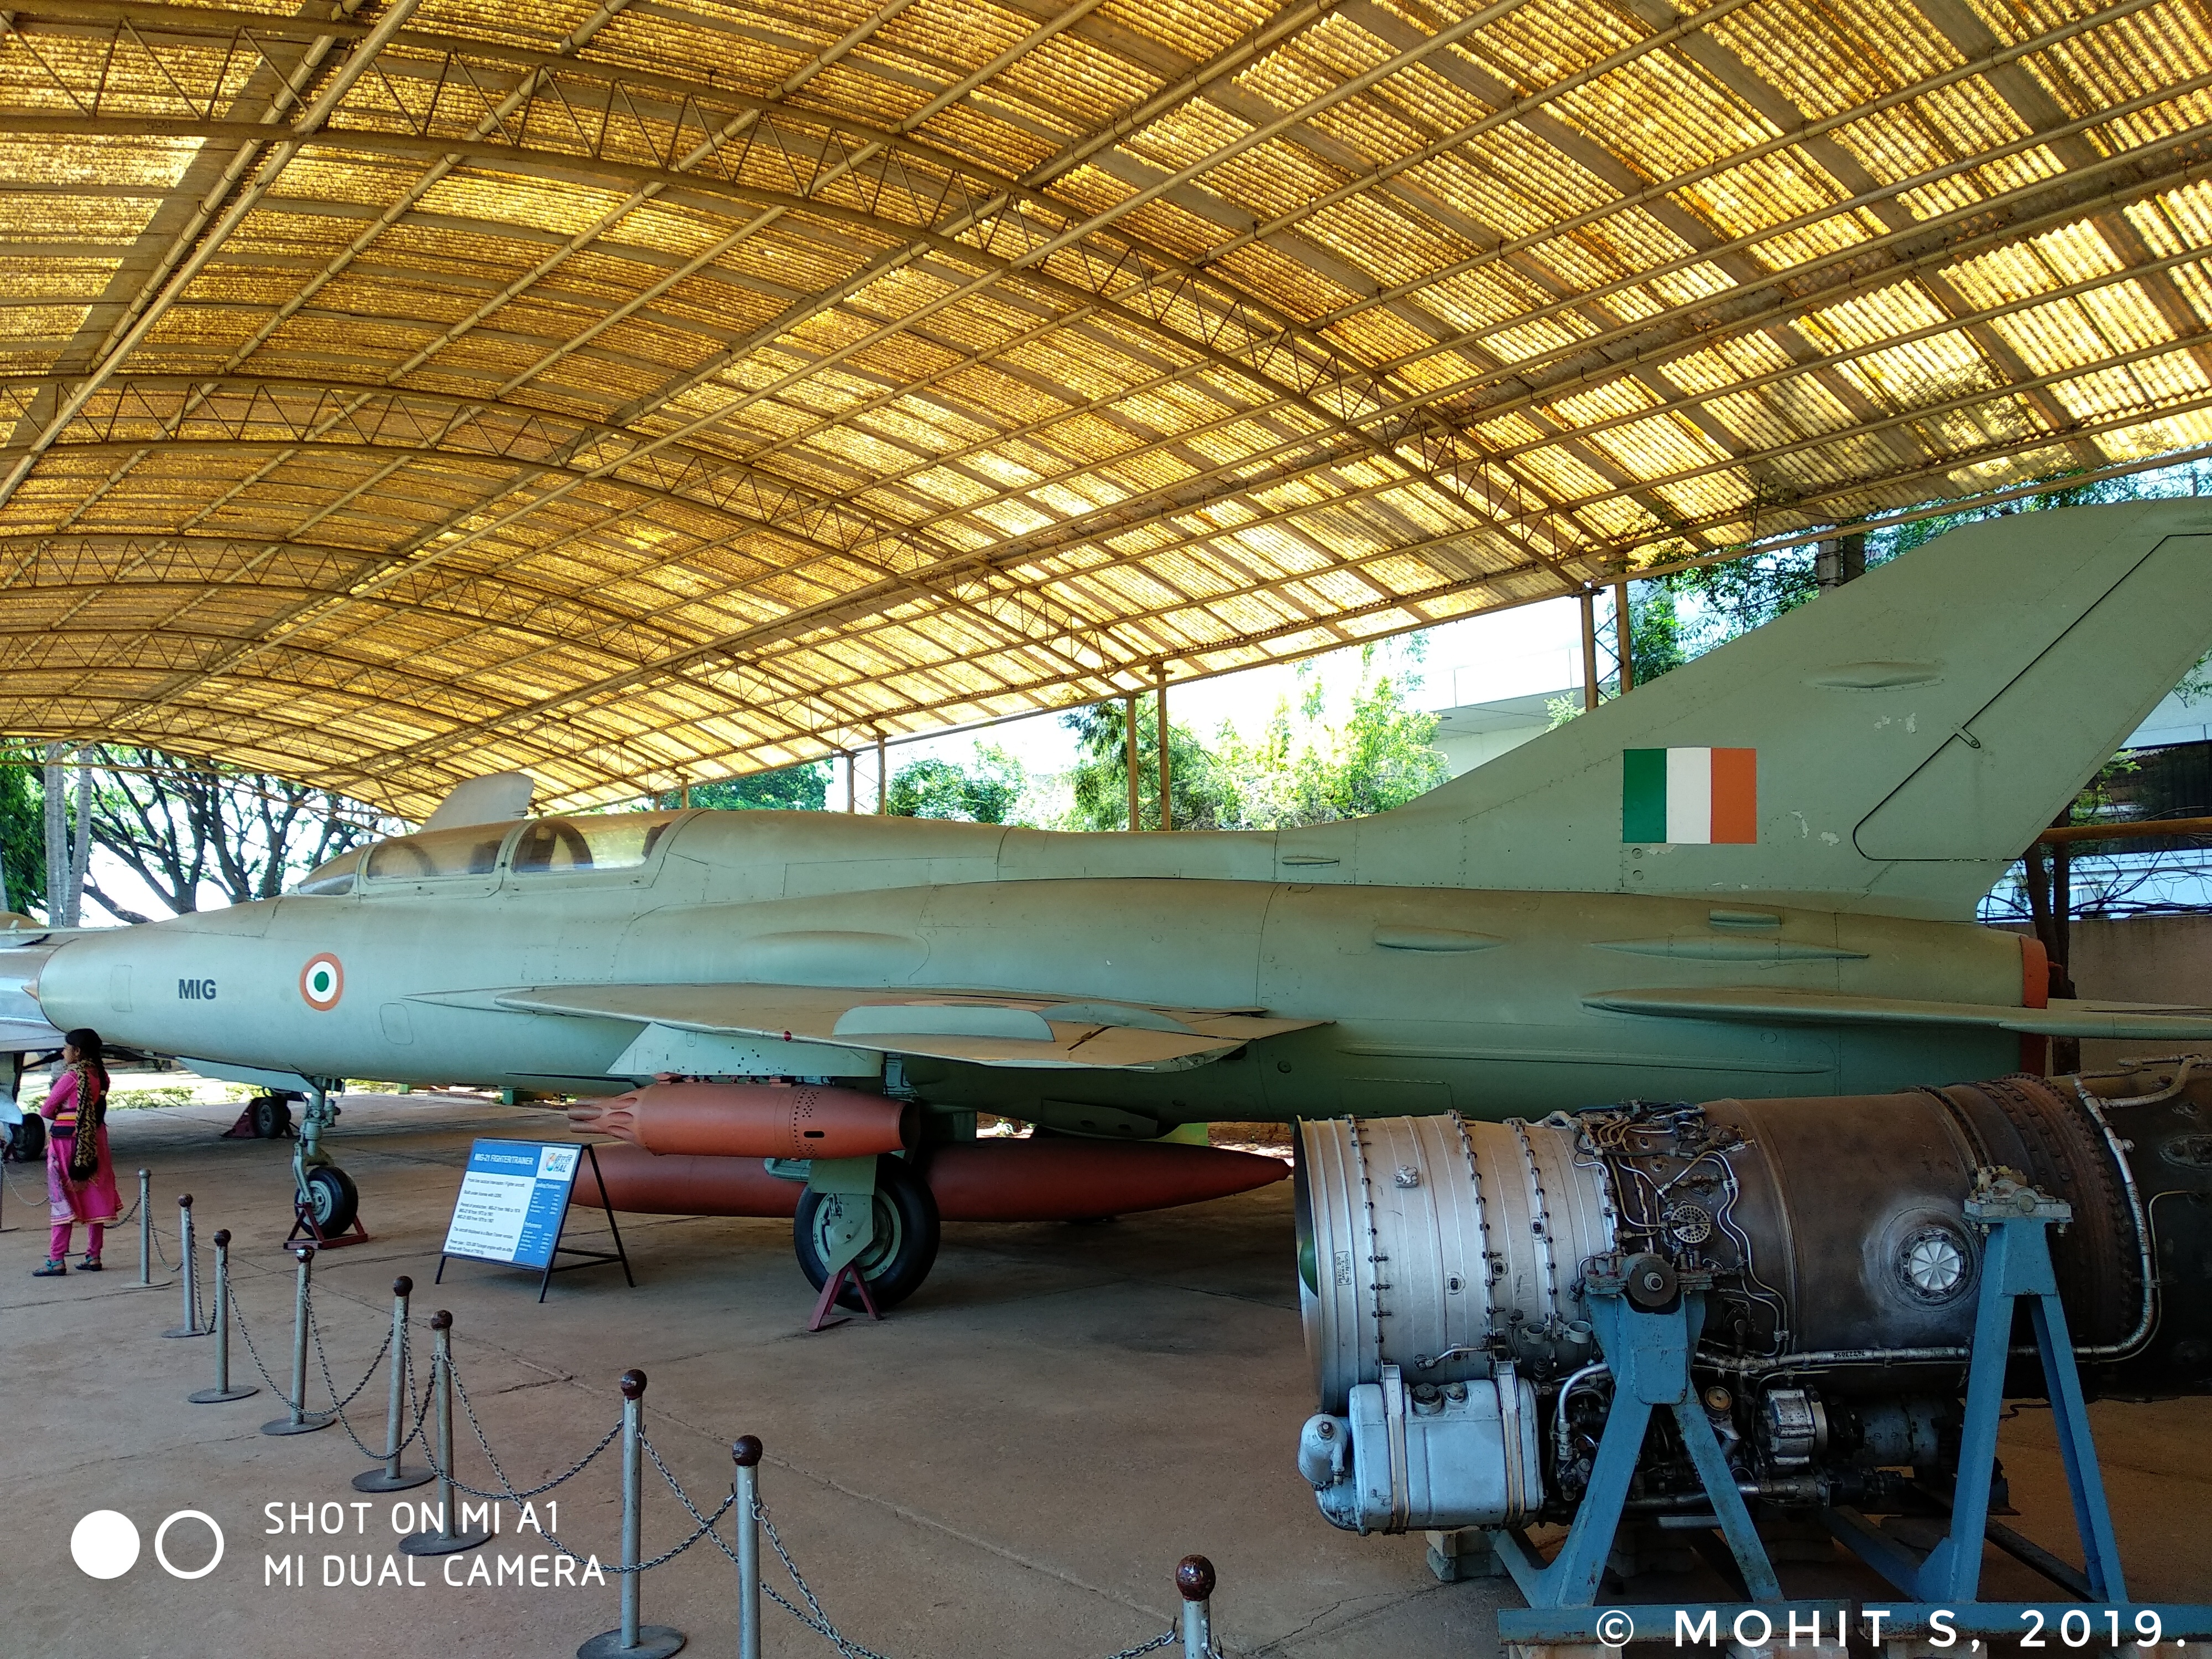 File:Indian Airforce MIG-21 trainer fighter jet. (48962599203).jpg - Wikimedia Commons